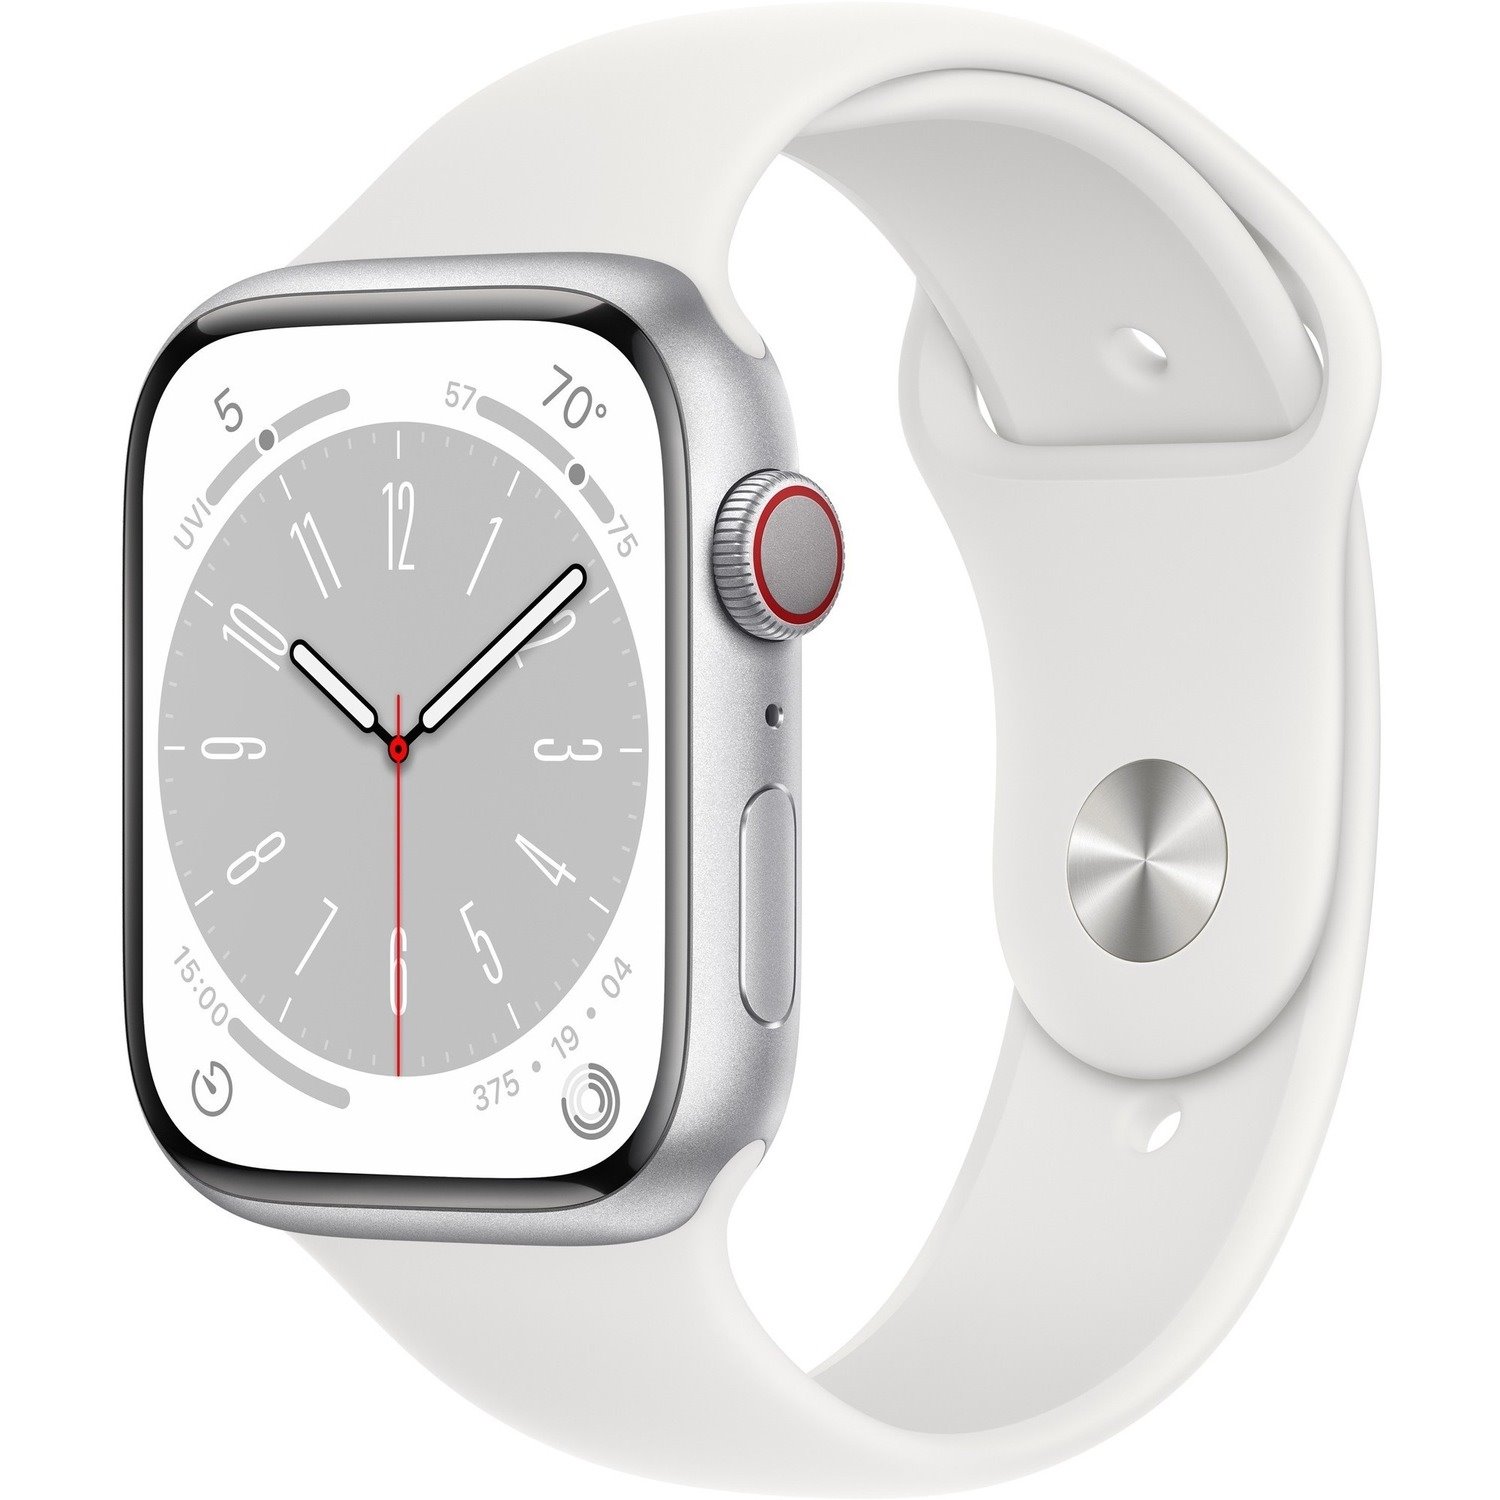 Apple Watch Series 8 Smart Watch - 45 mm Case Height - 35 mm Case Width - Silver Case Color - White Band Color - Aluminium Case Material - Fluoroelastomer Band Material - Wireless LAN - LTE, UMTS